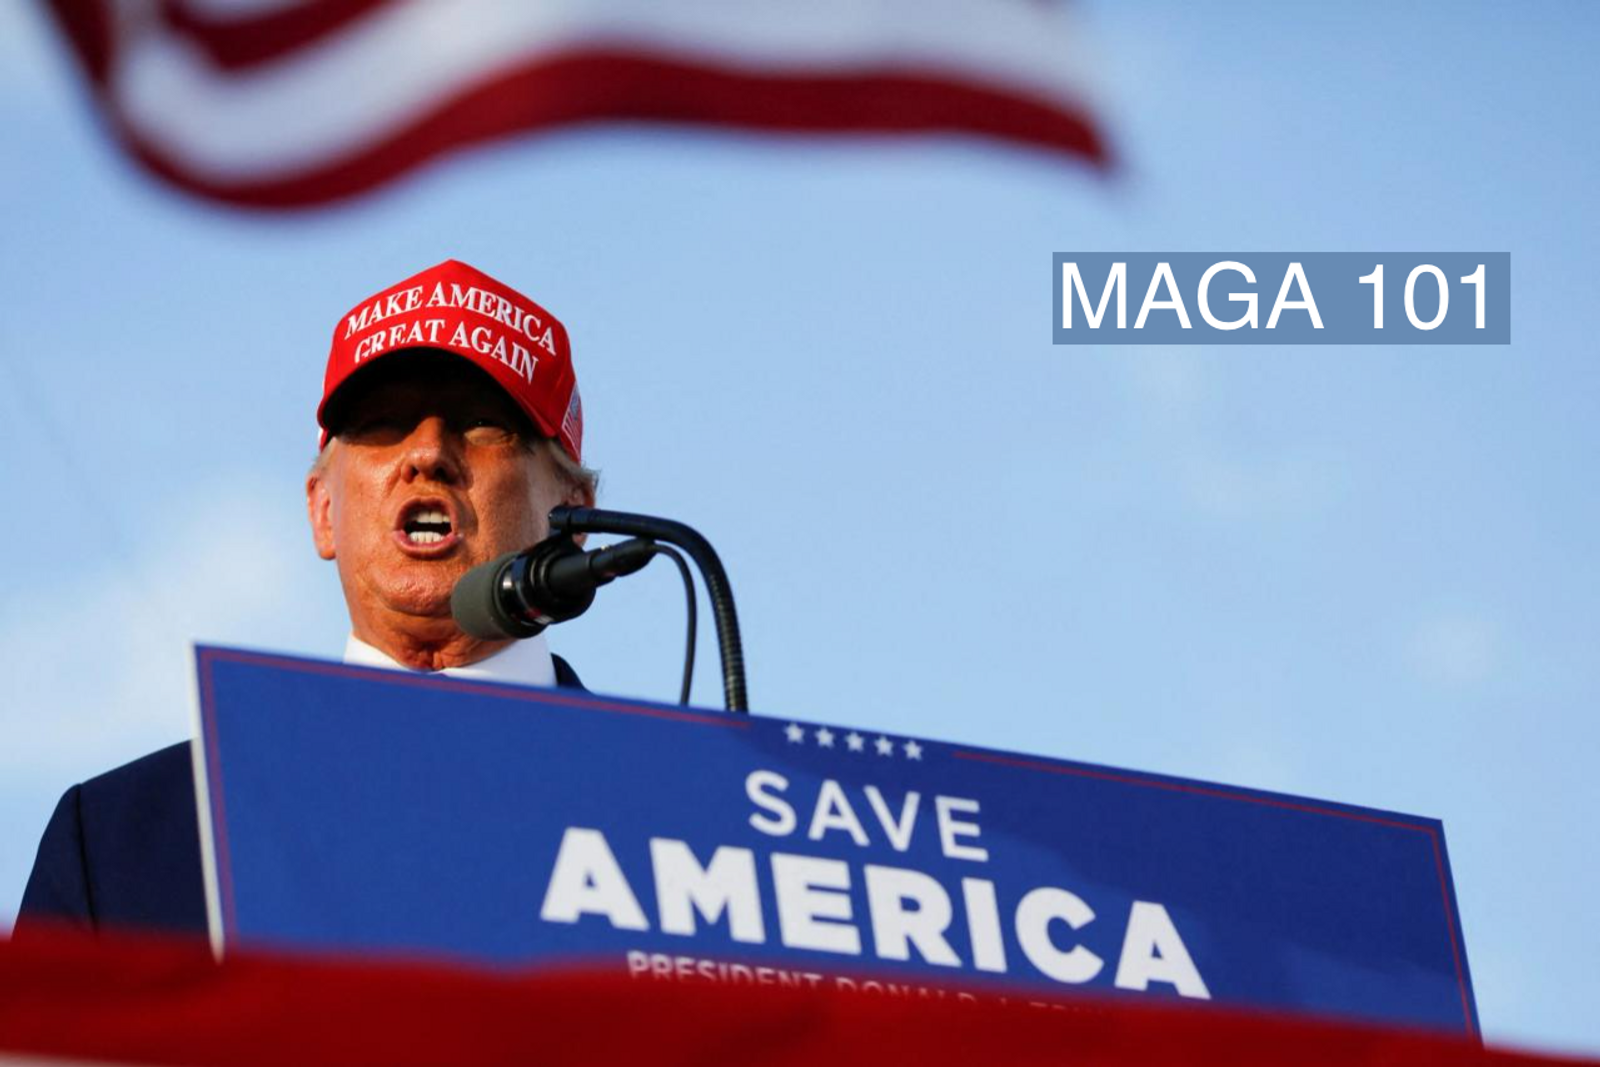 Former U.S. President Donald Trump speaks during a rally ahead of the midterm elections, in Miami, Florida, U.S., November 6, 2022.